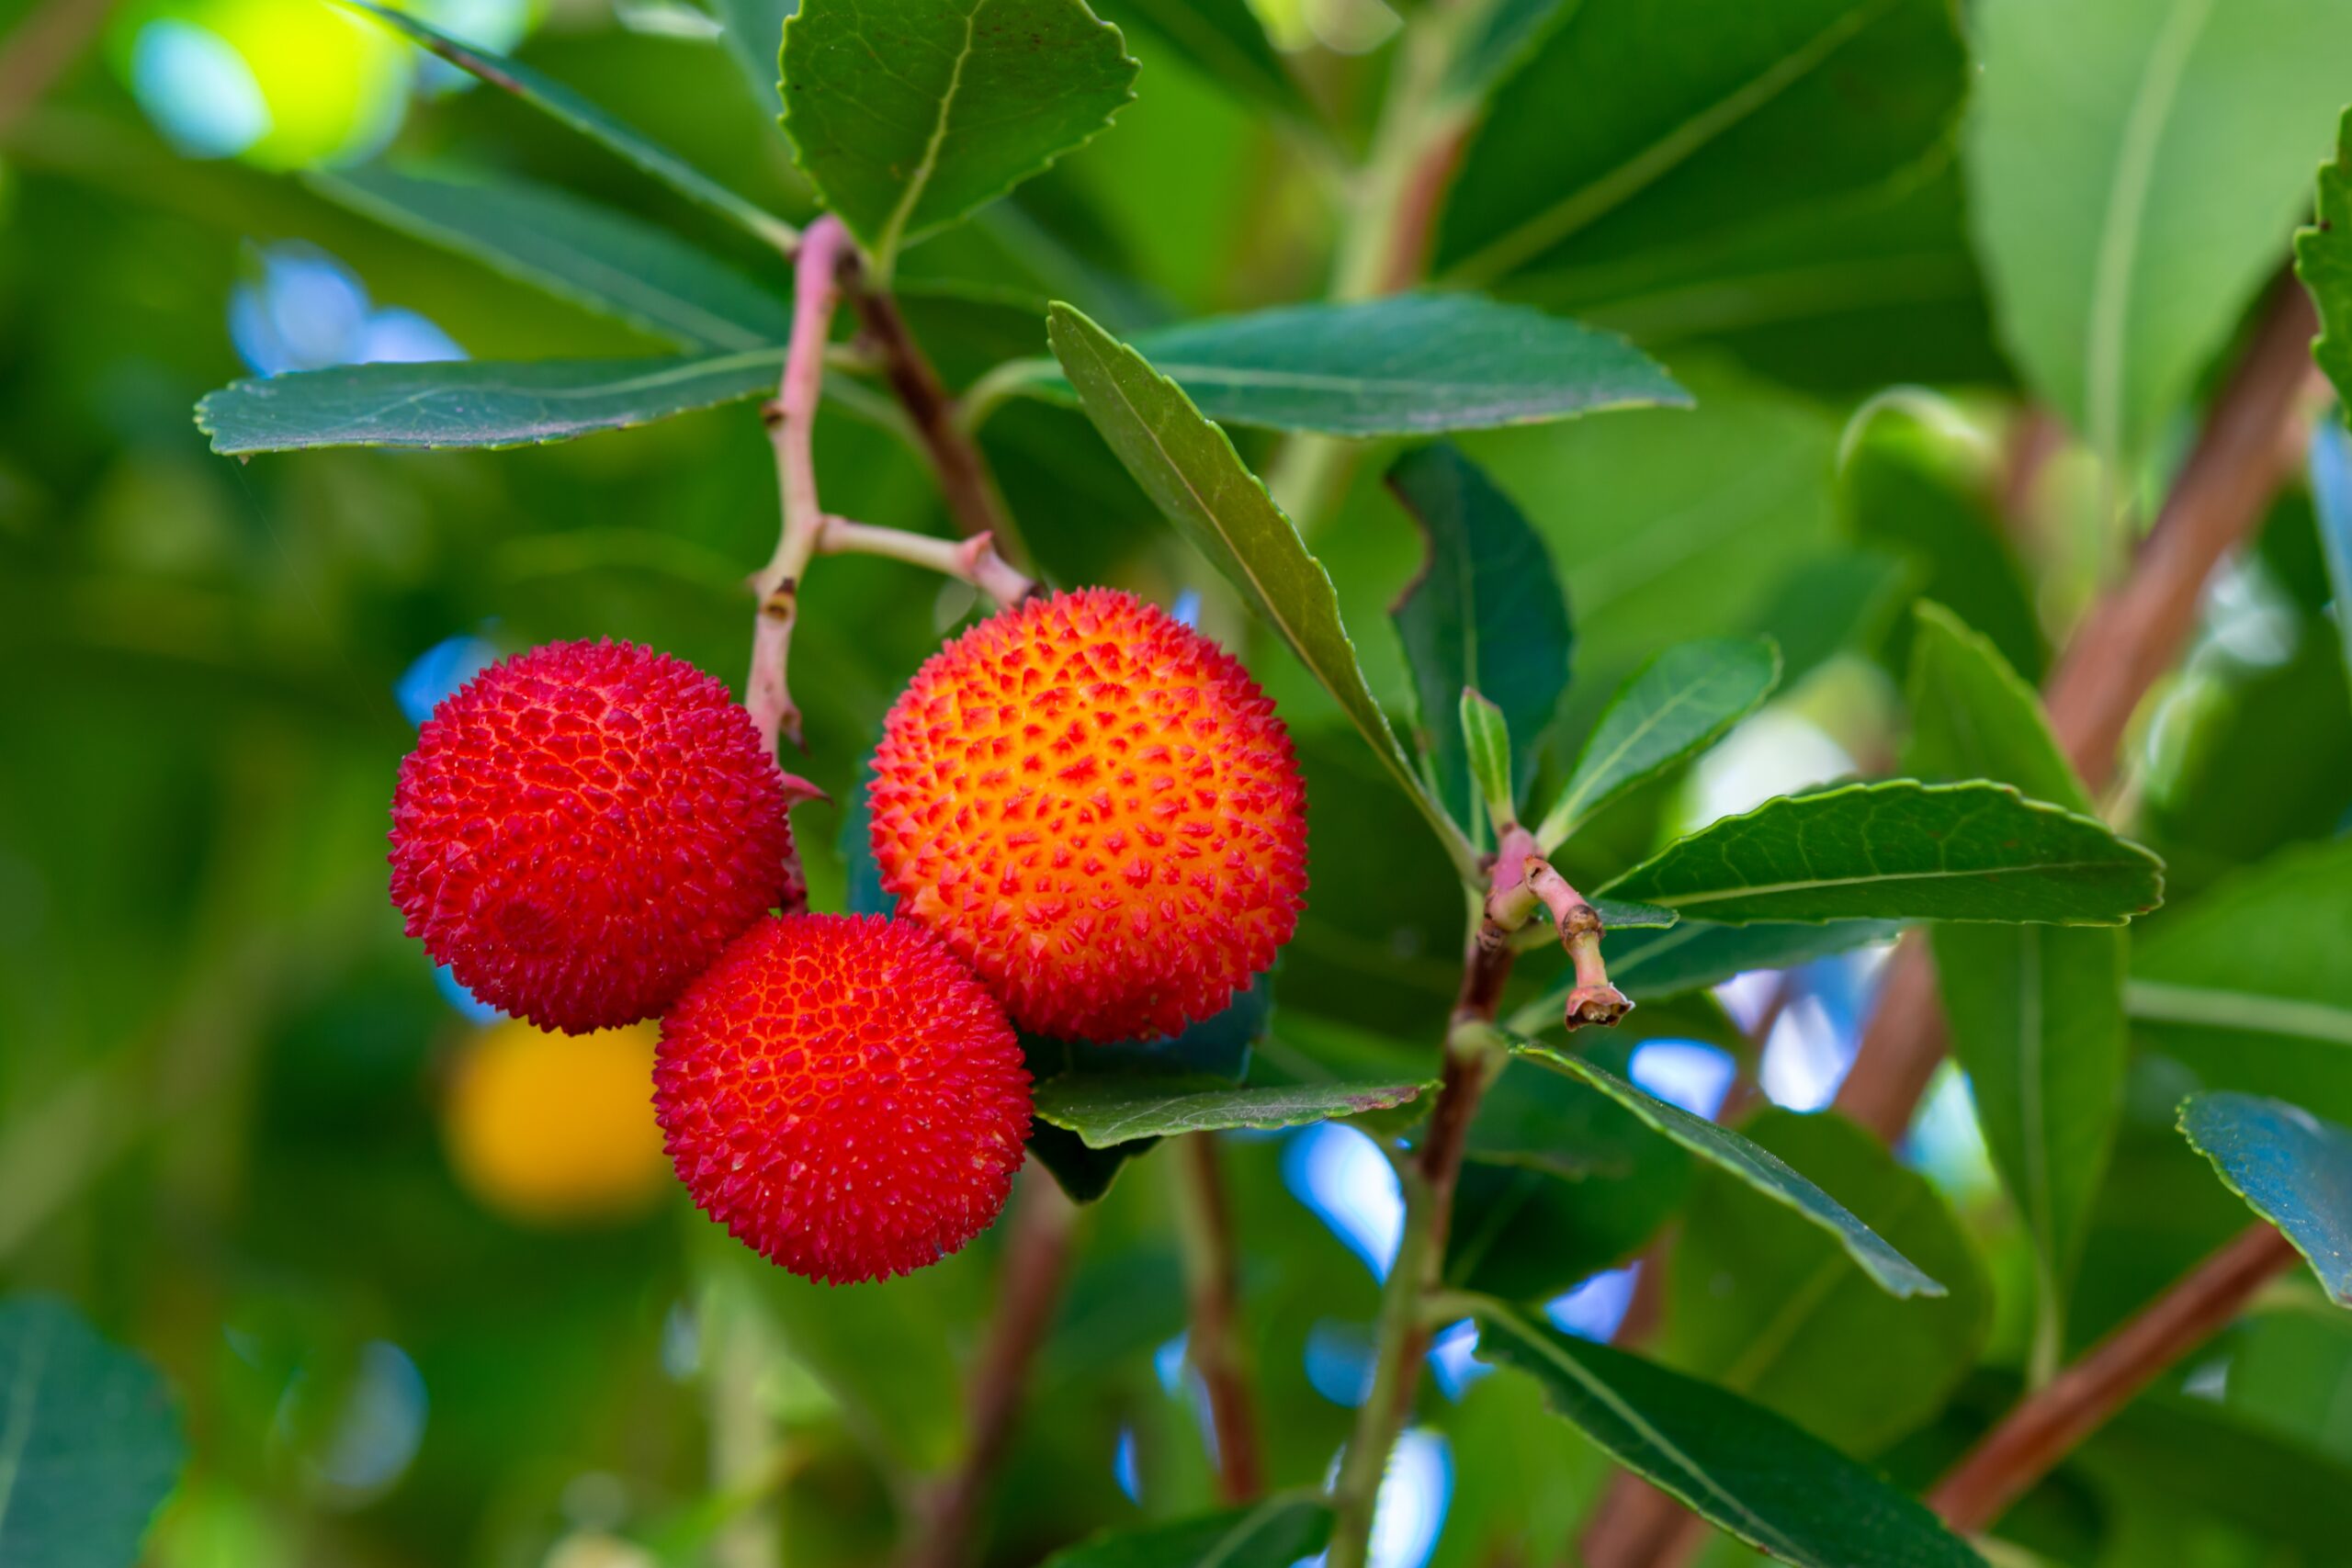 The orange-red fruit of the strawberry tree.